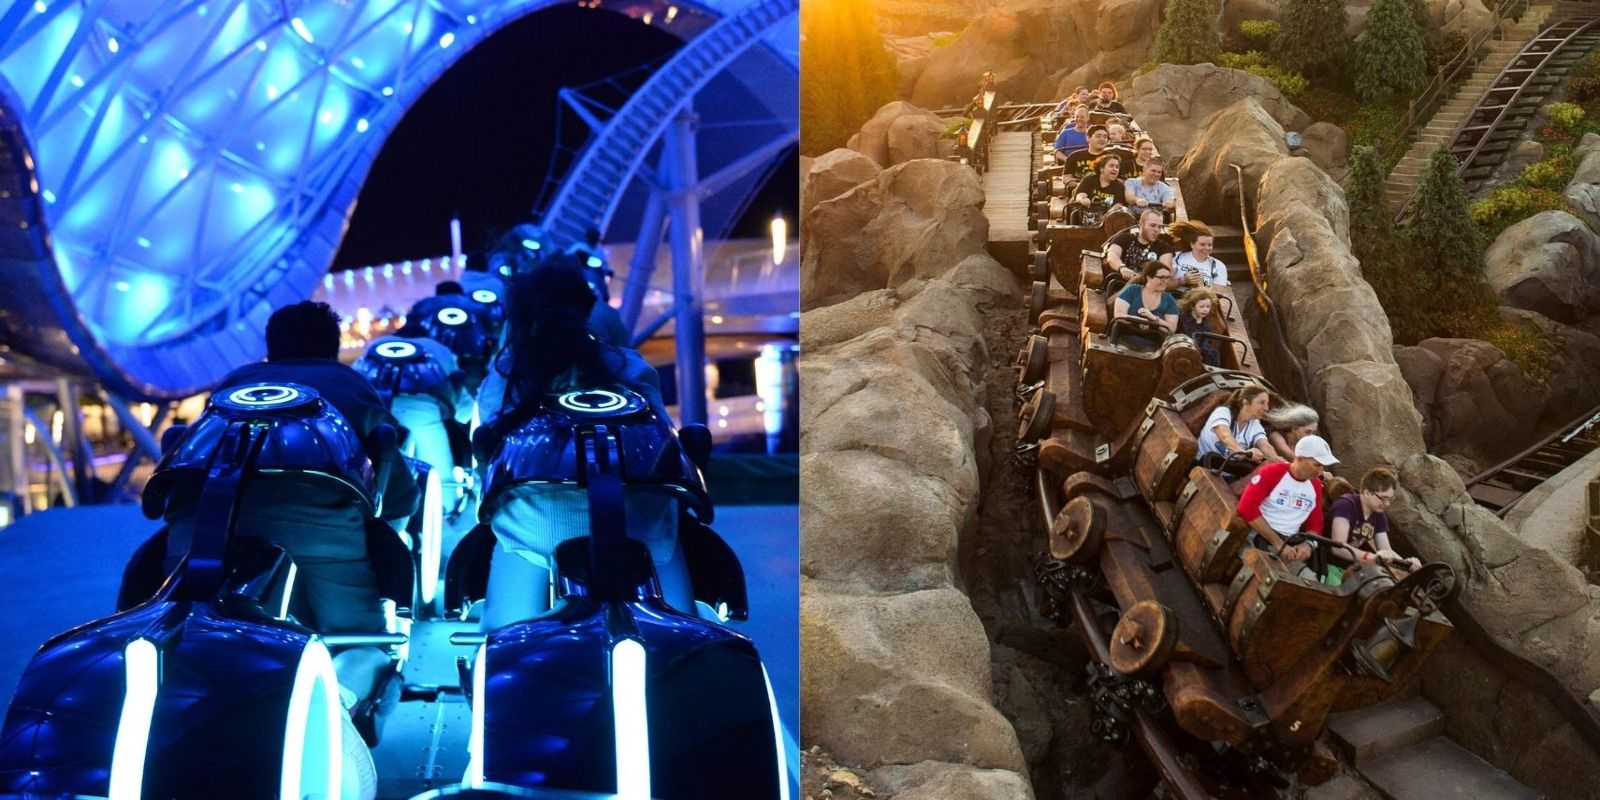 Split image of themed rollercoasters at Disney parks.